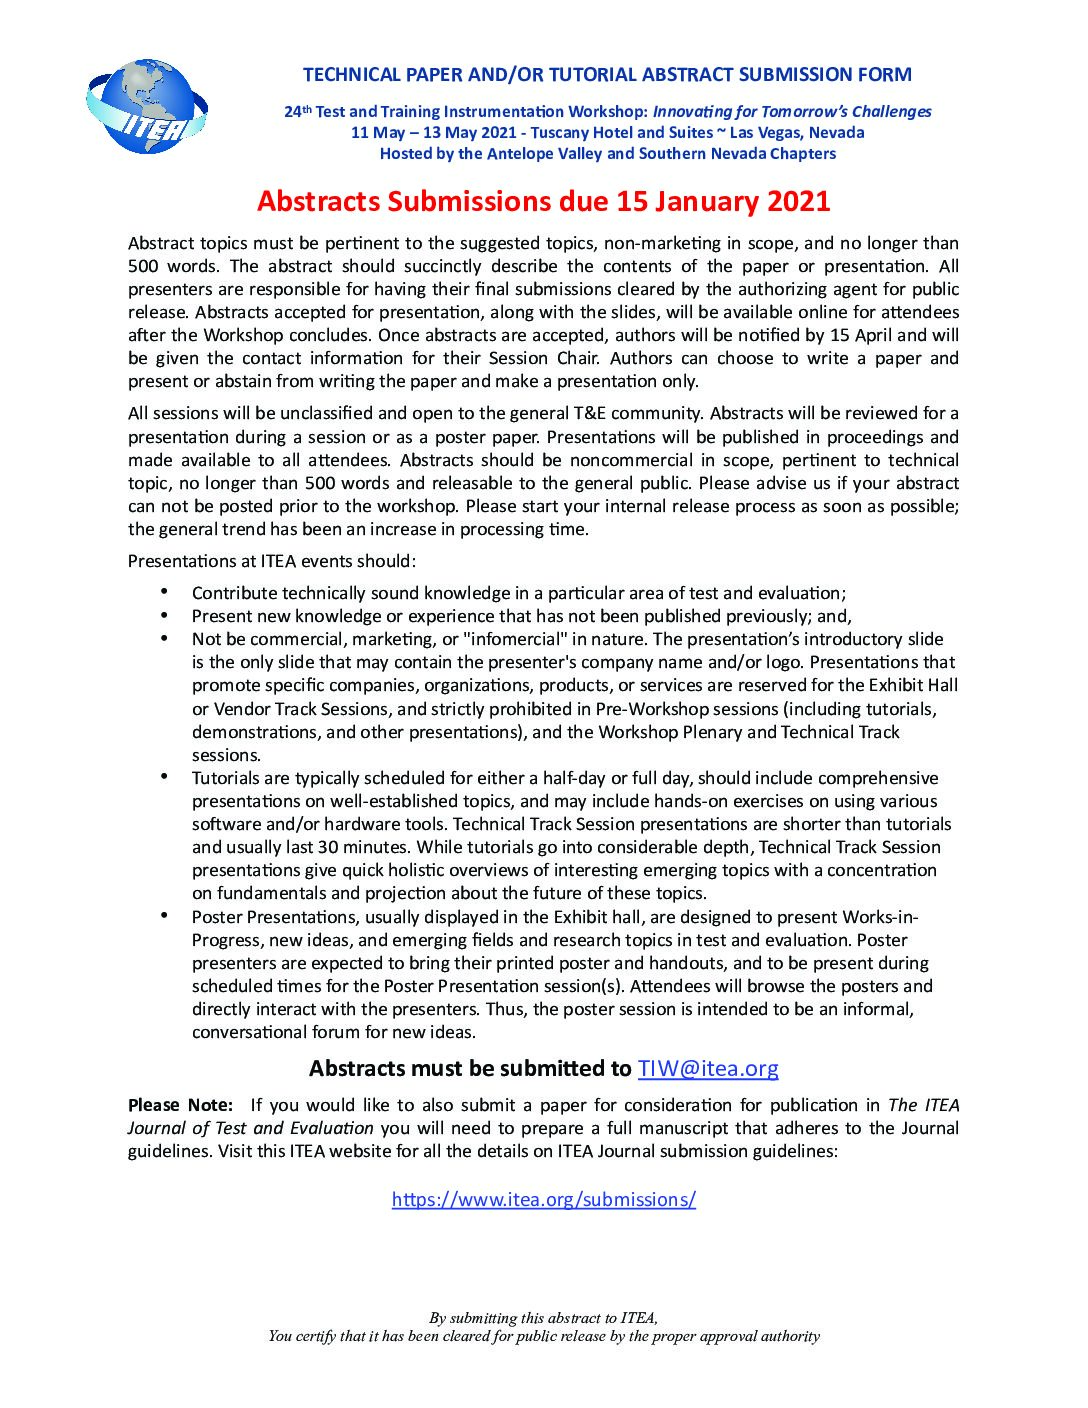 ABSTRACT SUBMISSION FORM – DUE 15 JAN